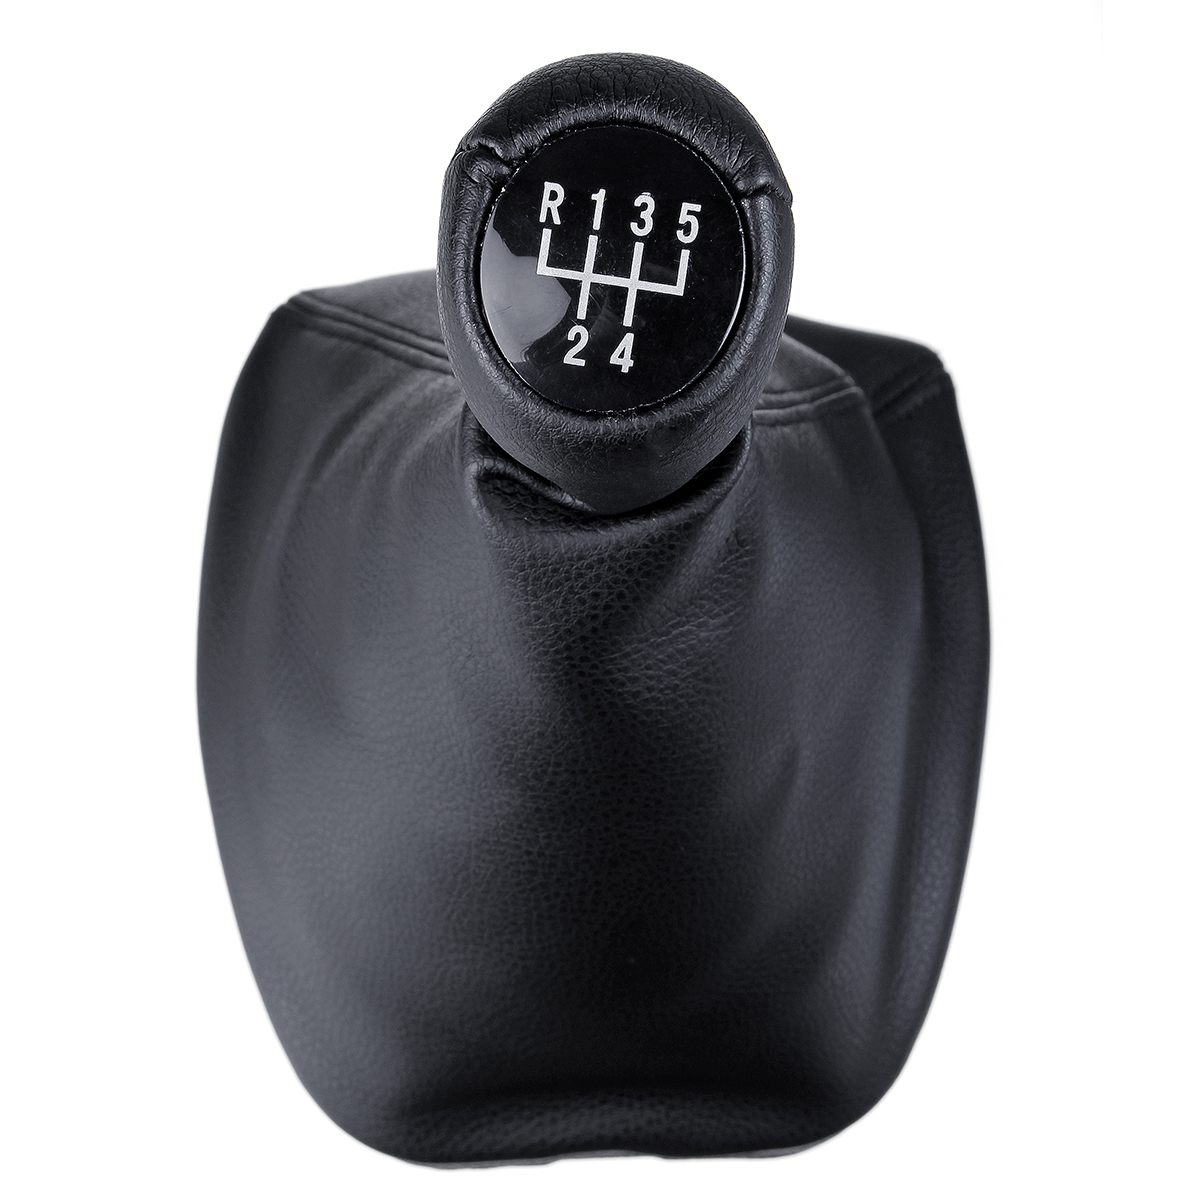 5 Speed Gear Shift Knob Gaiter Boot Cover PU Leather for BMW 3 Series E46 1997-2005 LHD